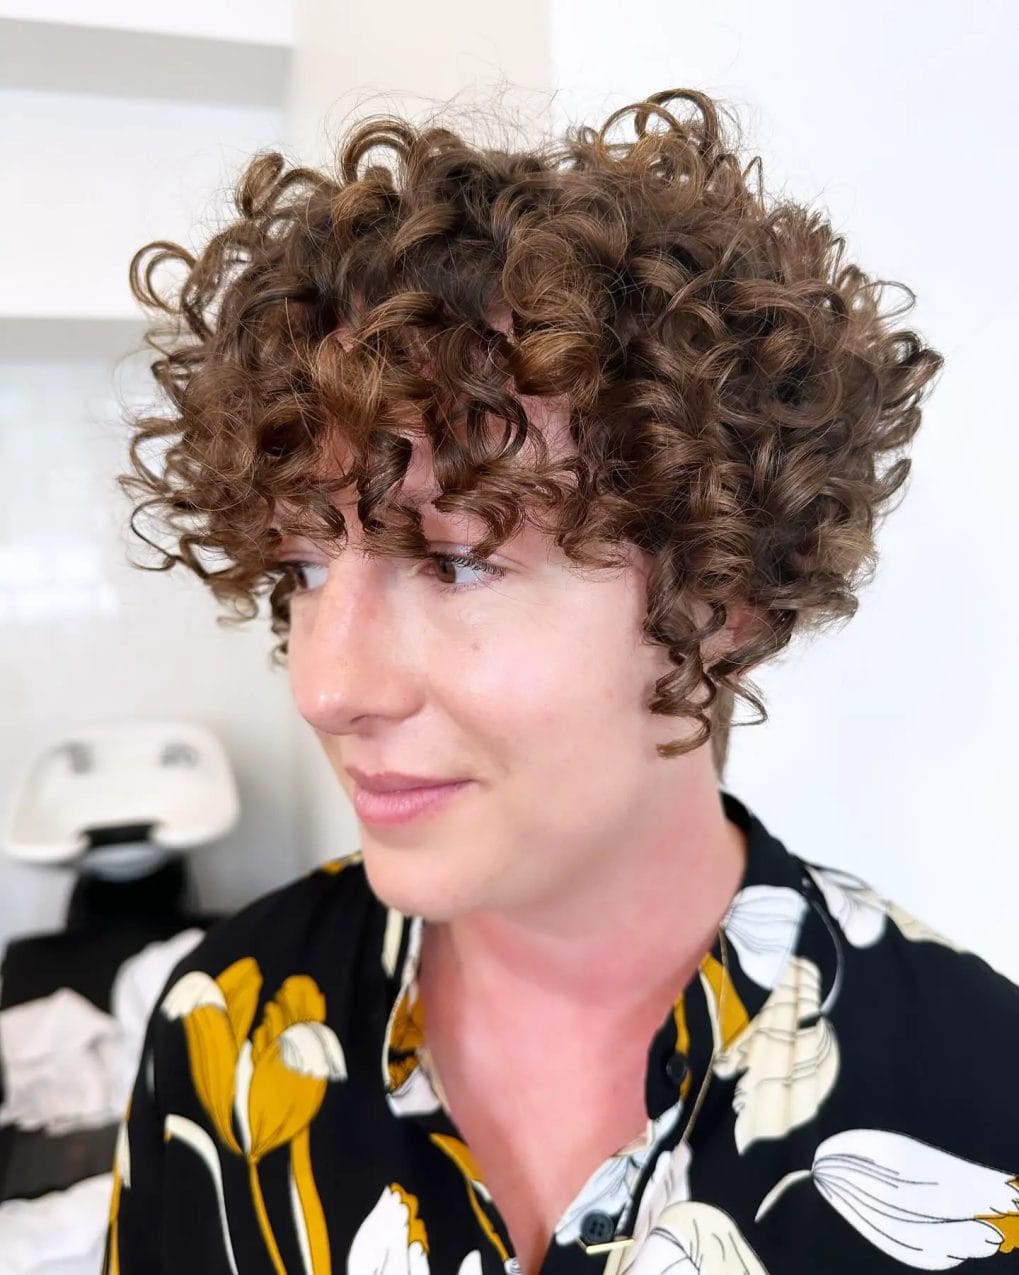 Warm chestnut bouncy curls framing the face in playful pixie